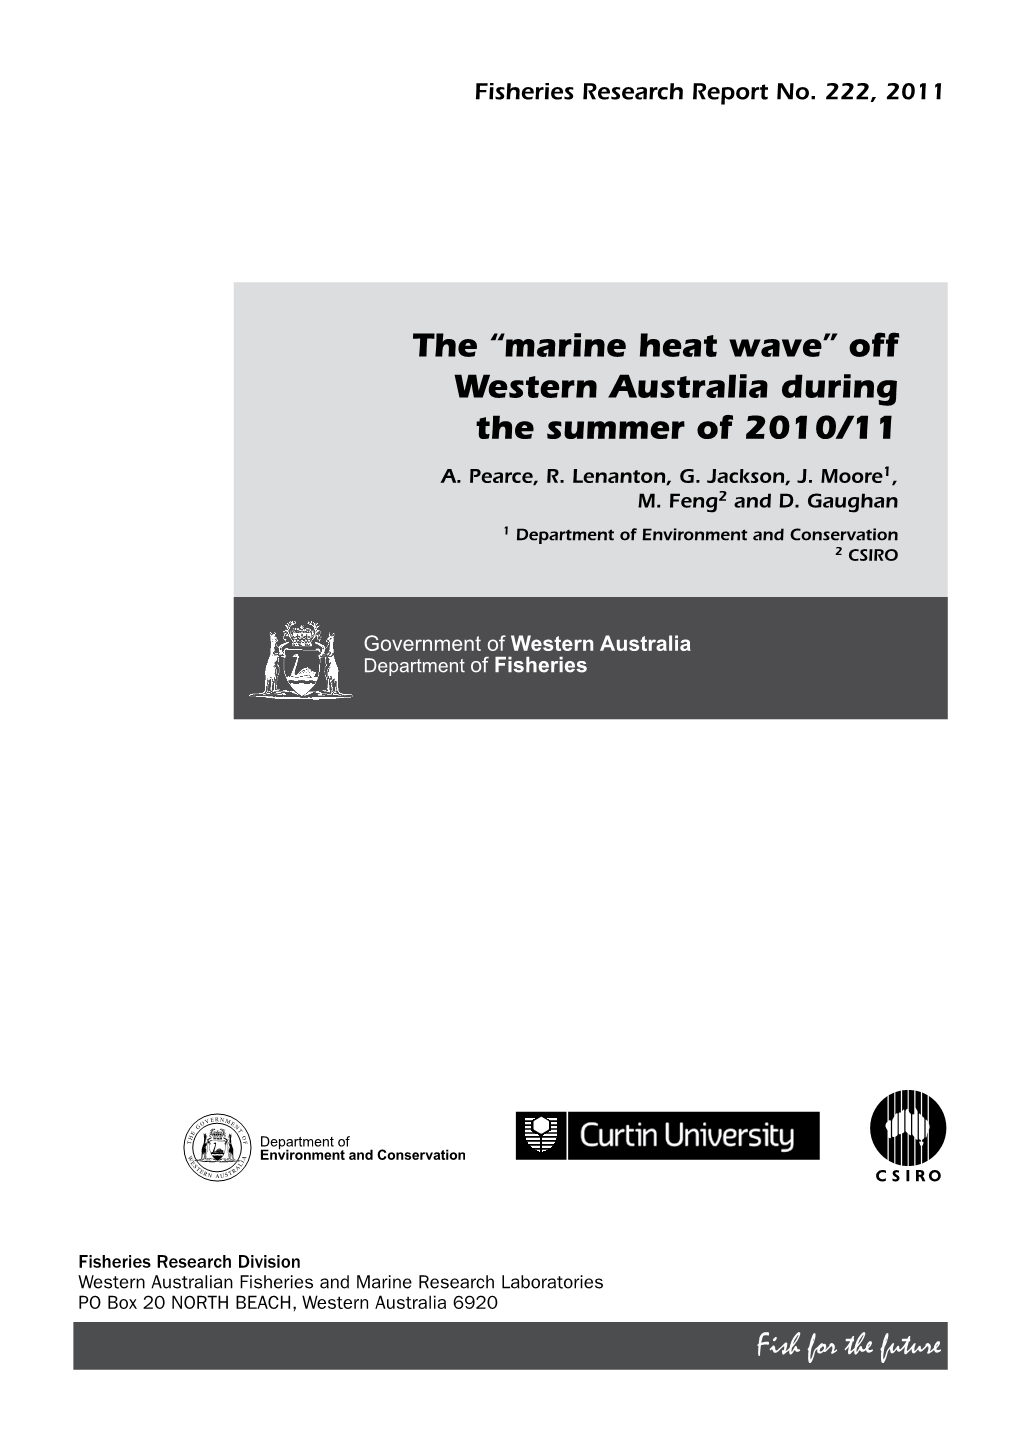 Heat Wave” Off Western Australia During the Summer of 2010/11 A